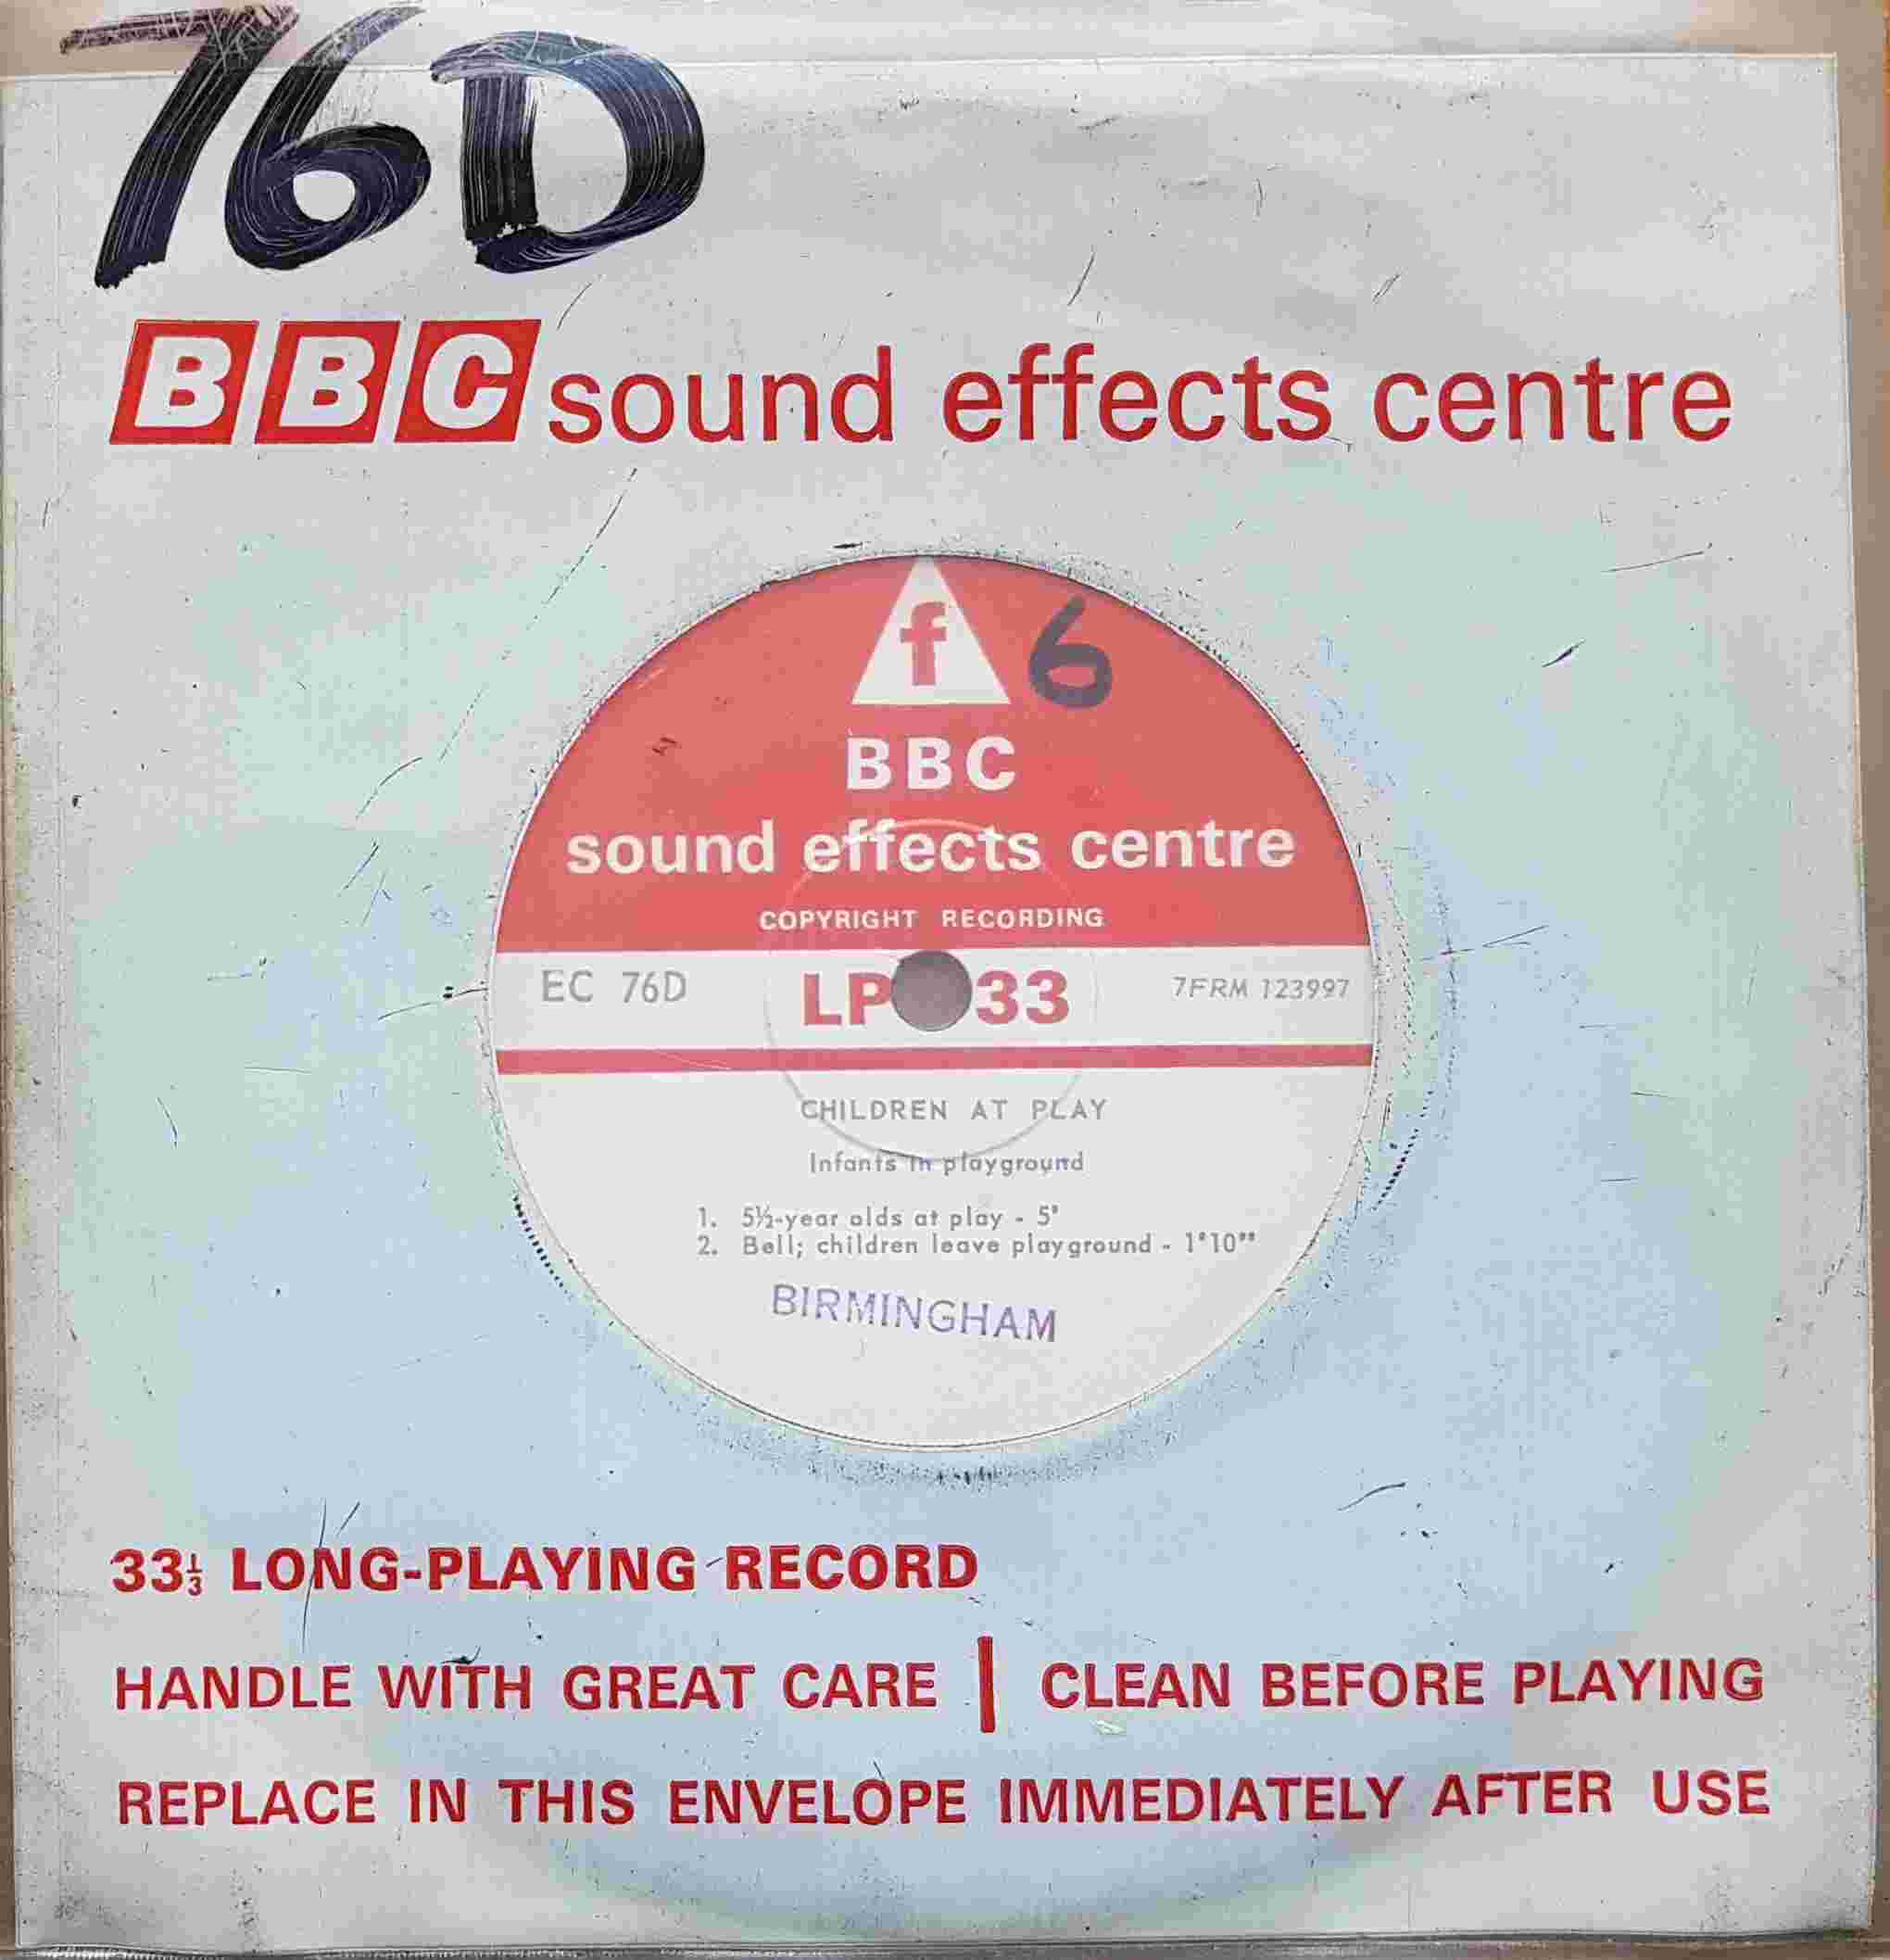 Picture of EC 76D Children at play by artist Not registered from the BBC records and Tapes library